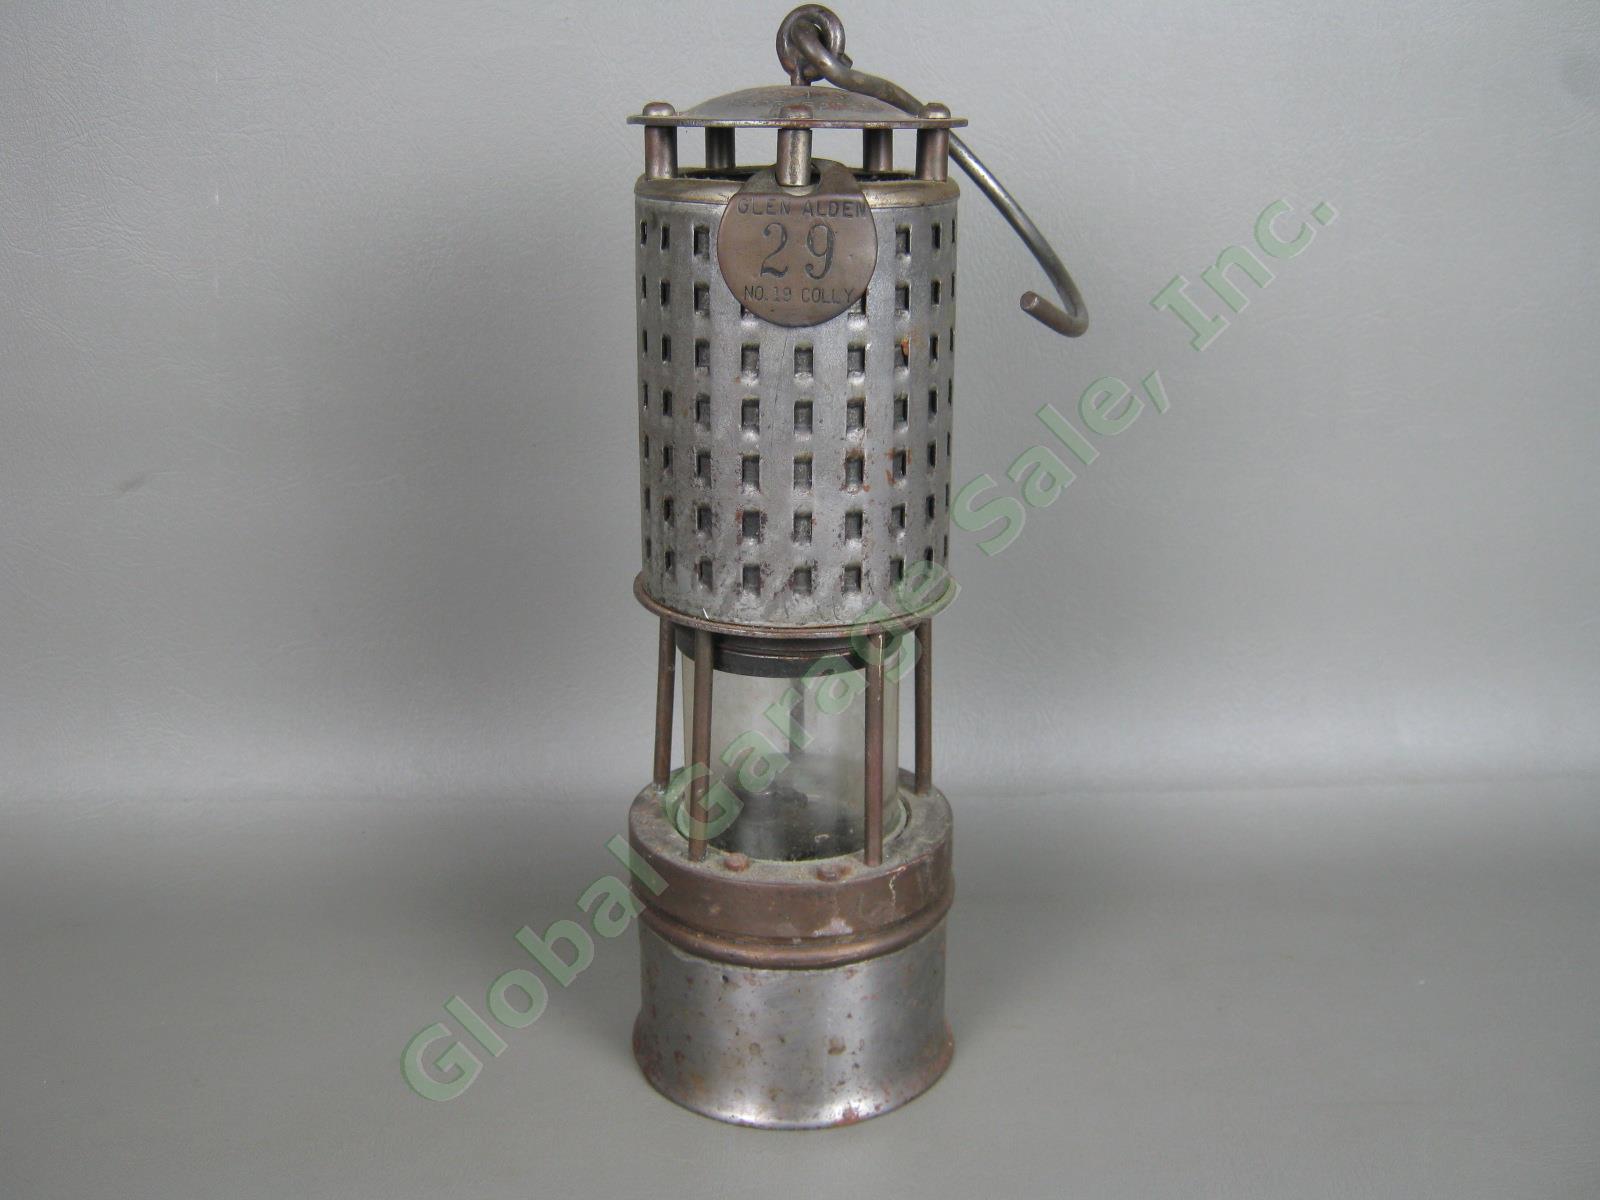 Vtg Permissible 201 Miners Safety Lamp Glen Alden Coal Co 29 No 19 Colly Tag NR!